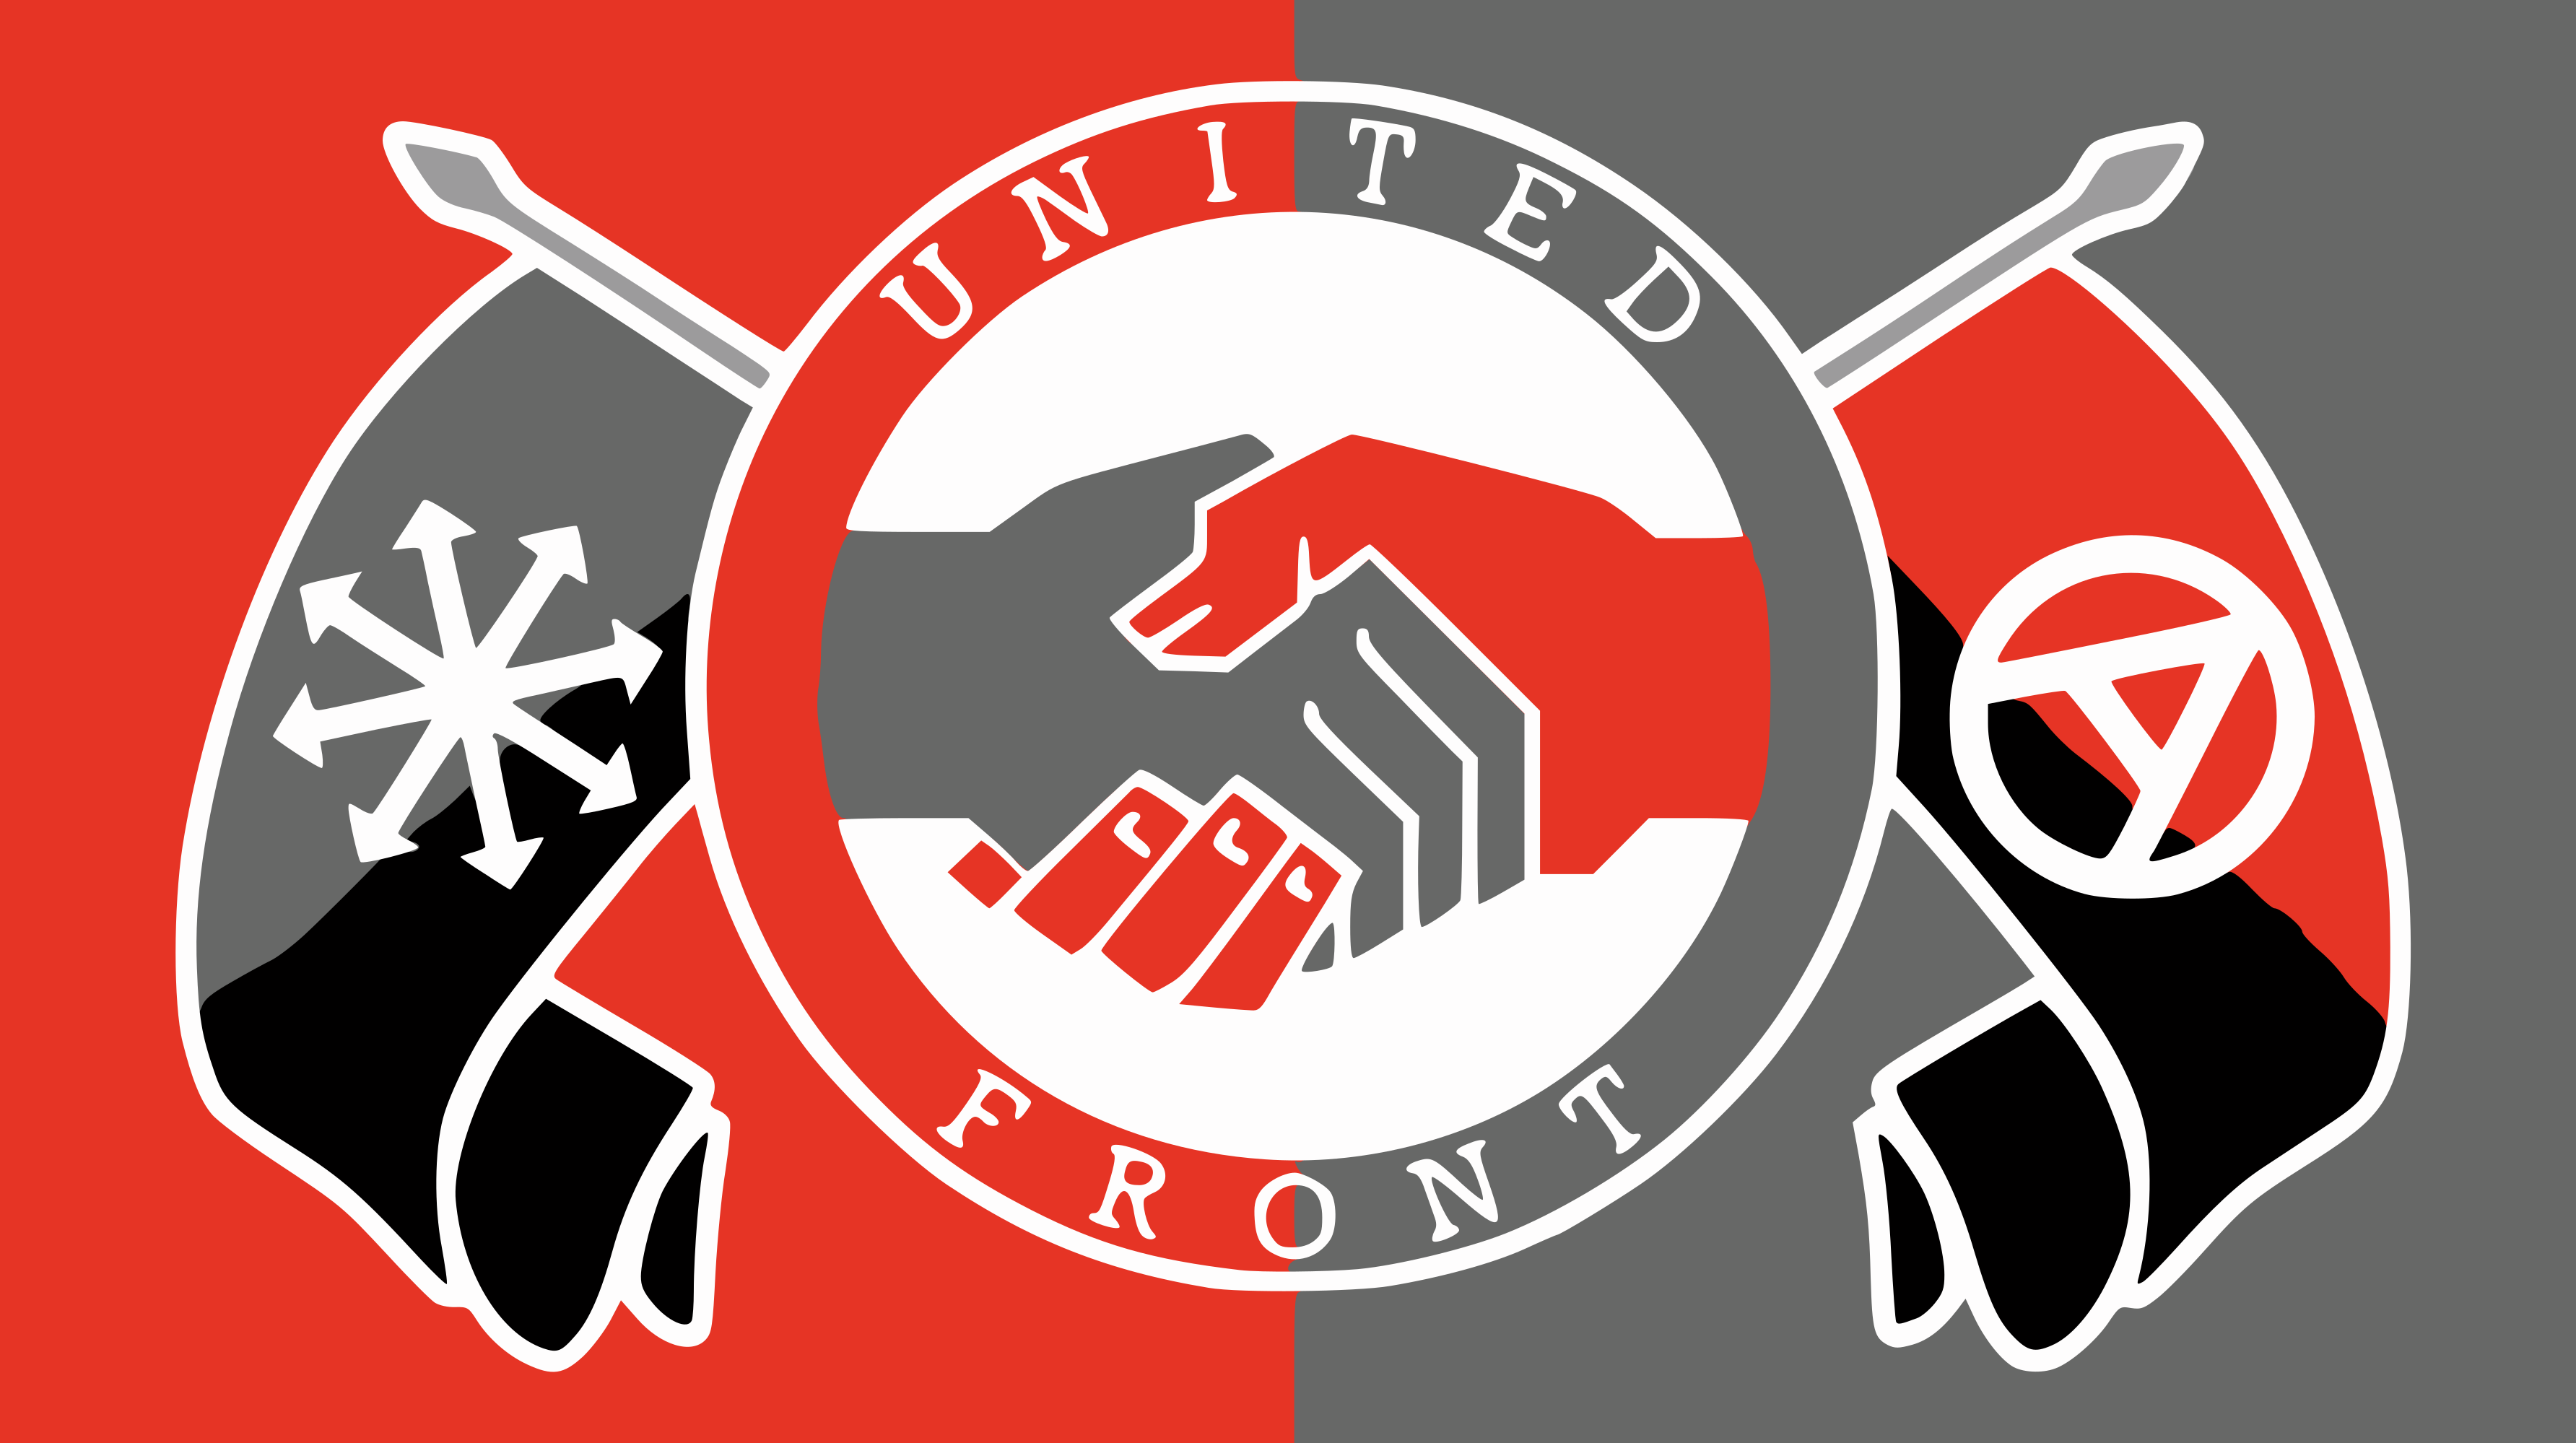 United front